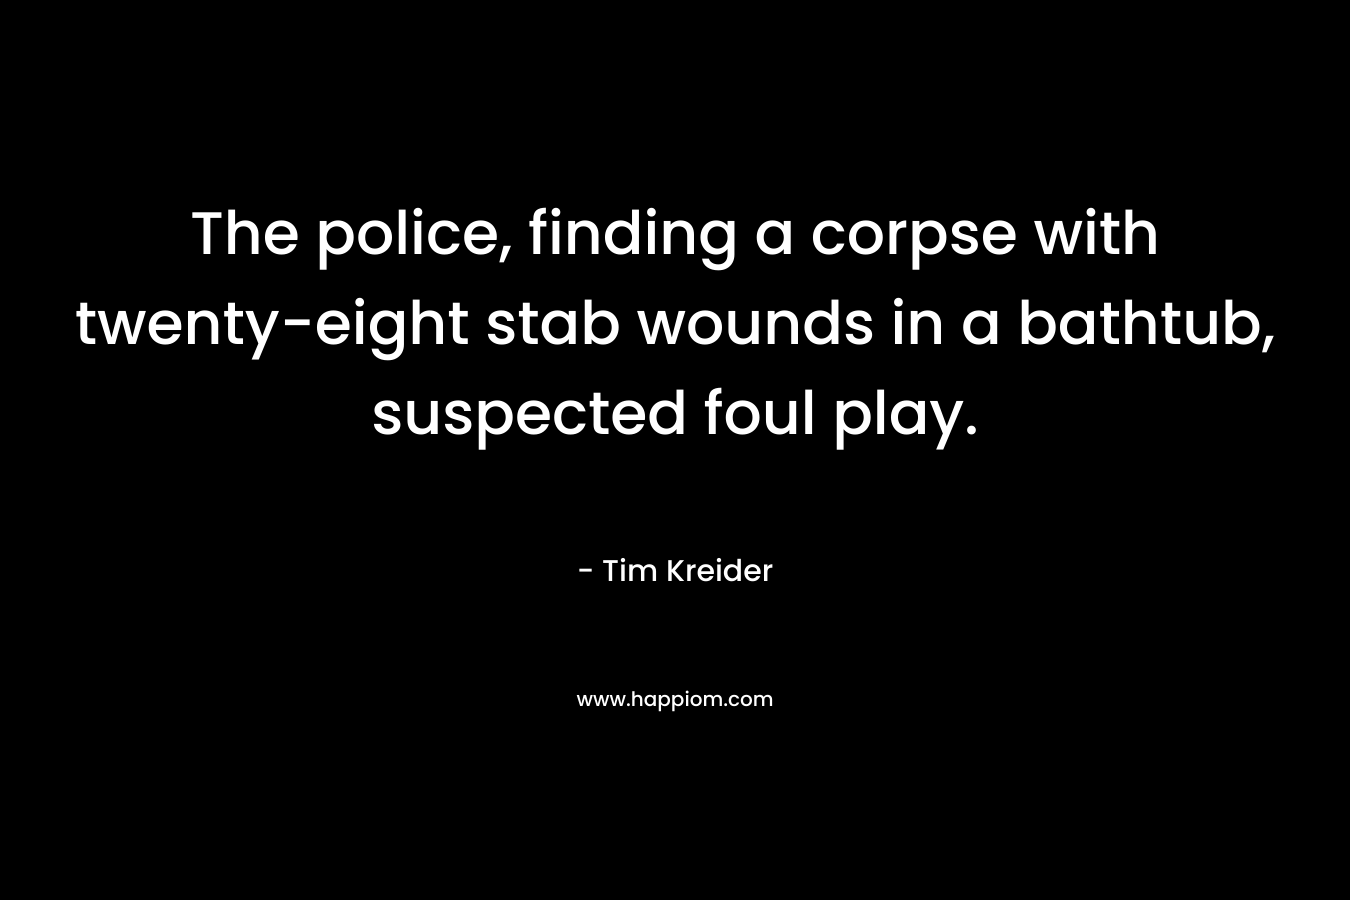 The police, finding a corpse with twenty-eight stab wounds in a bathtub, suspected foul play. – Tim Kreider